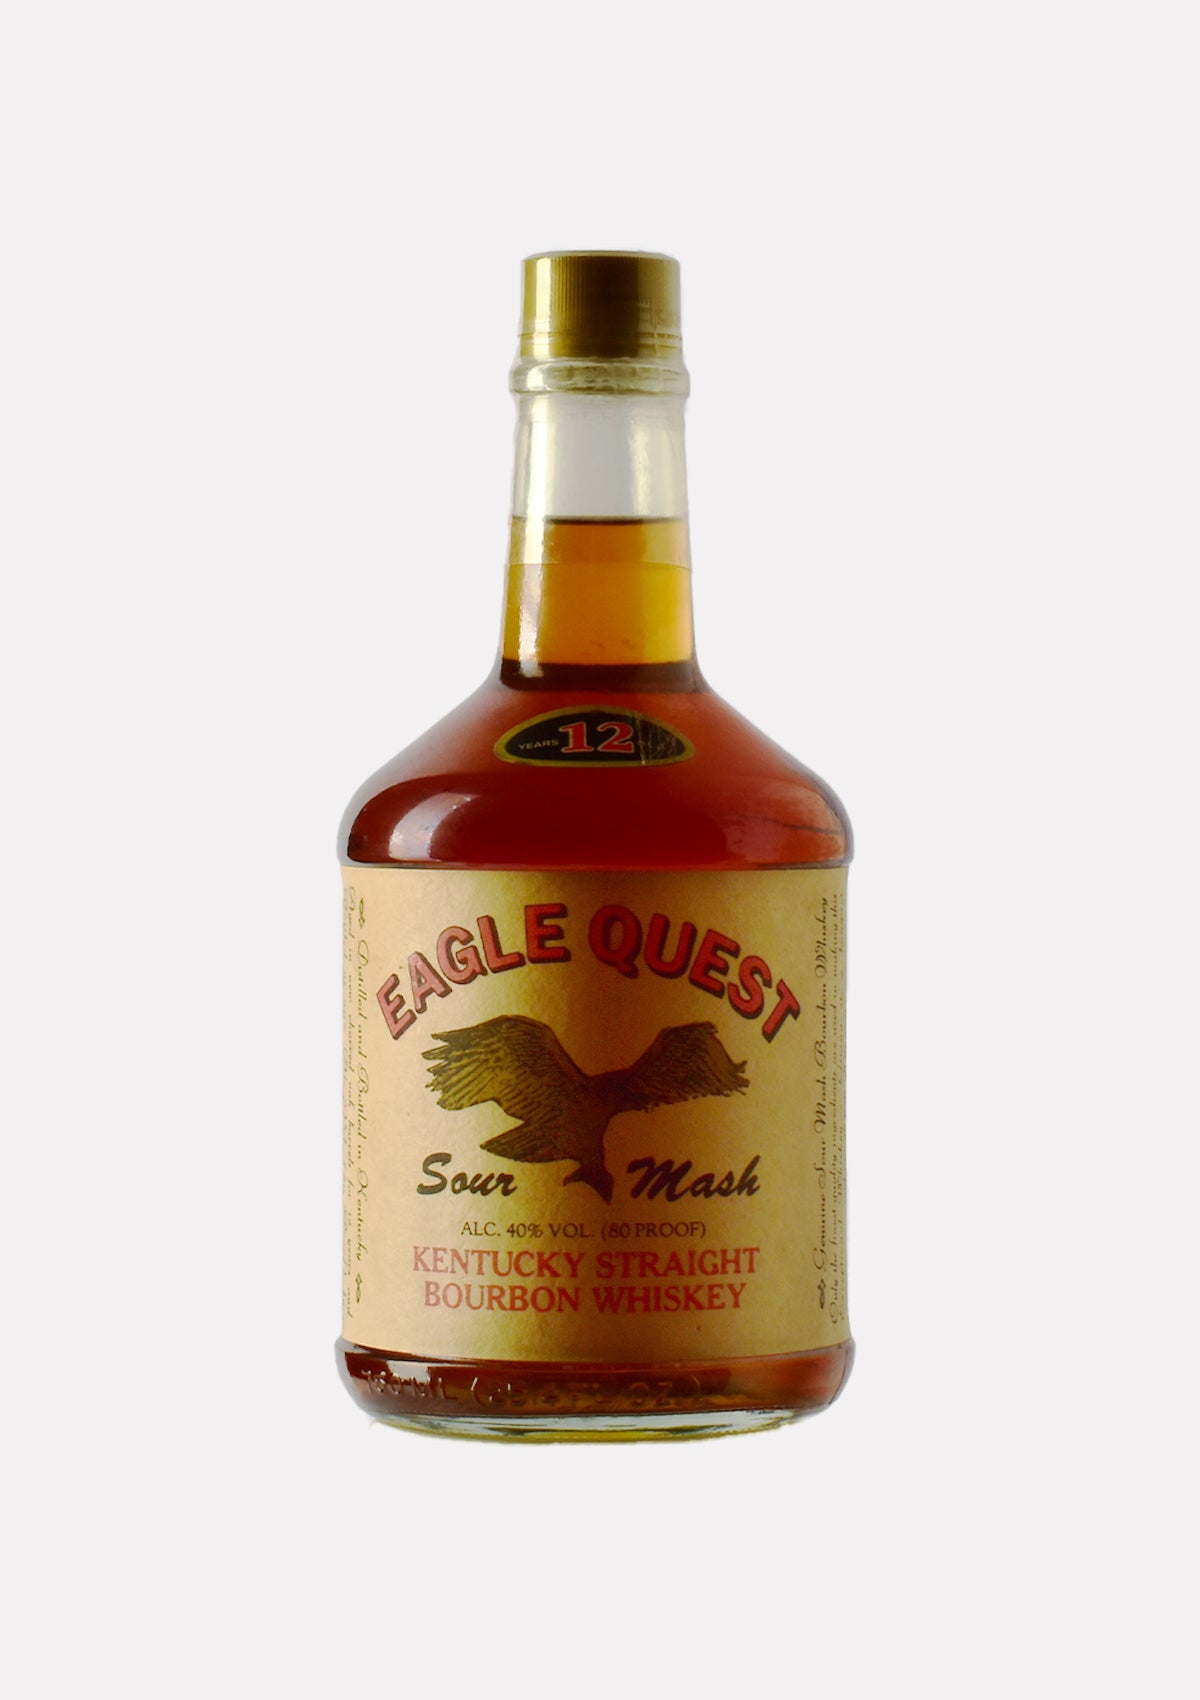 Eagle Quest Kentucky Straight Bourbon Whiskey 12 Jahre